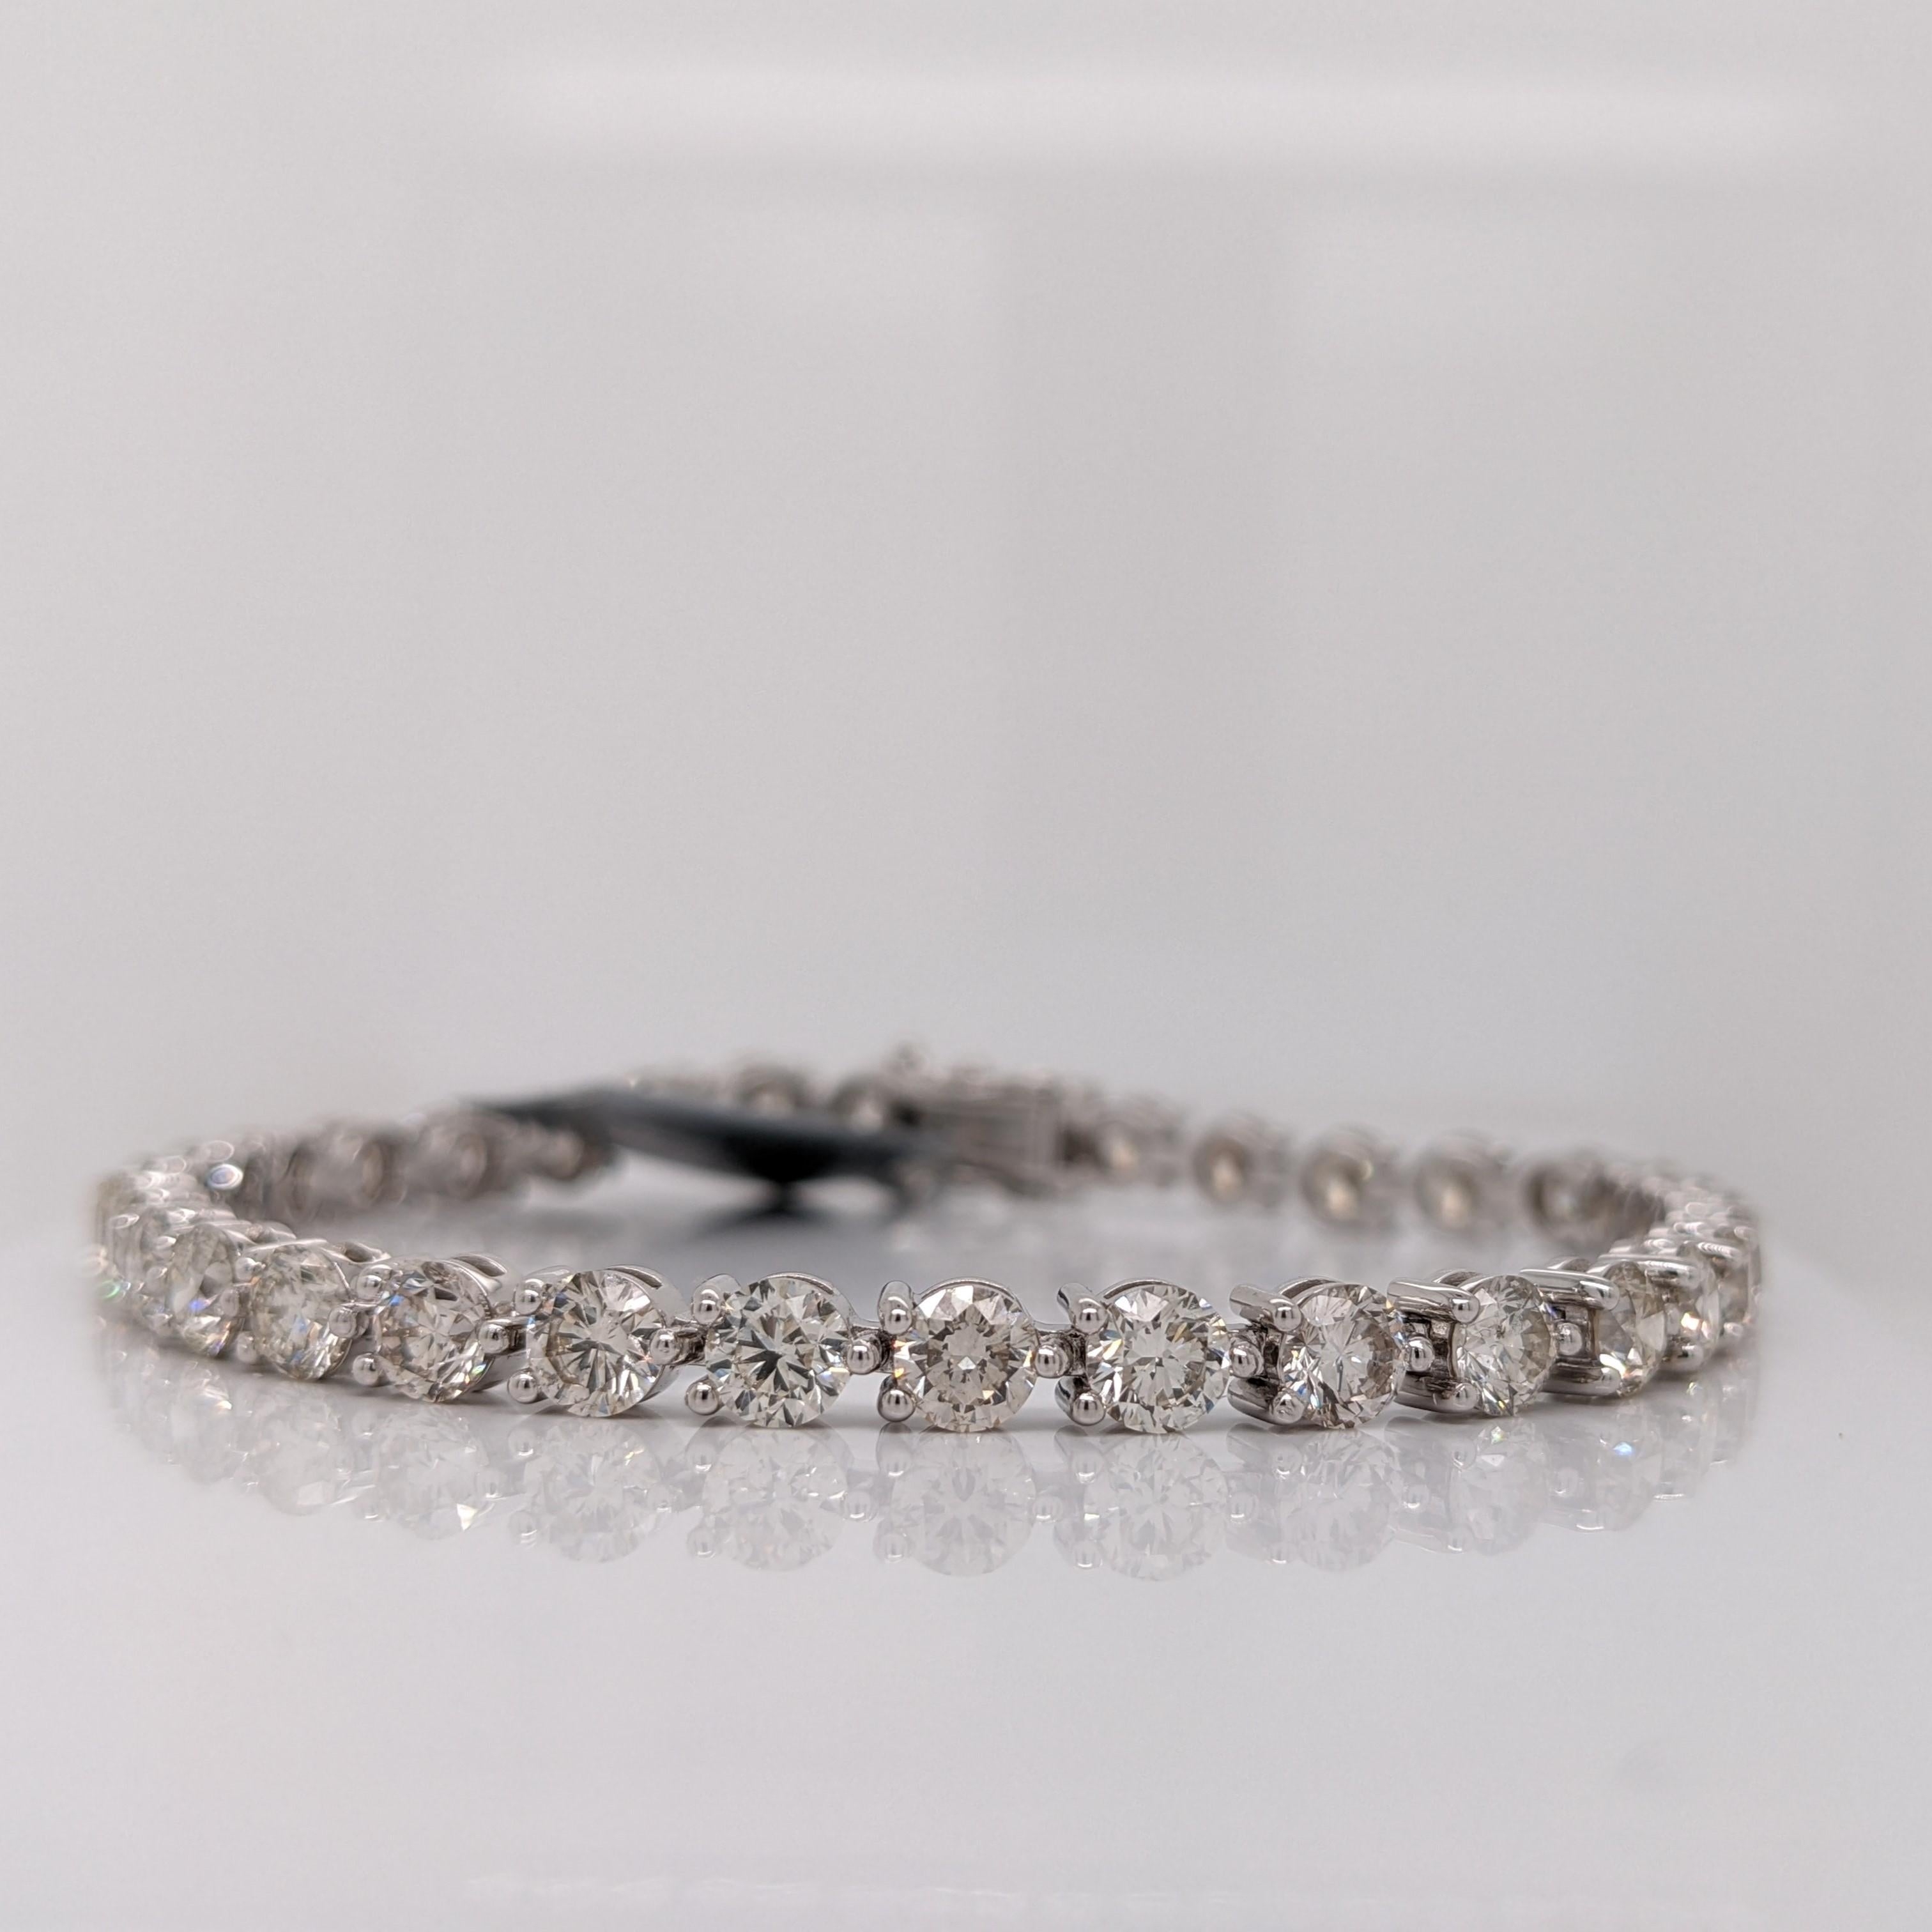 Introducing an exquisite natural diamond tennis bracelet that speaks volumes of elegance and luxury. Crafted in lustrous 14K white gold, this breathtaking piece showcases a remarkable 10 carats of scintillating round diamonds, captivating every eye